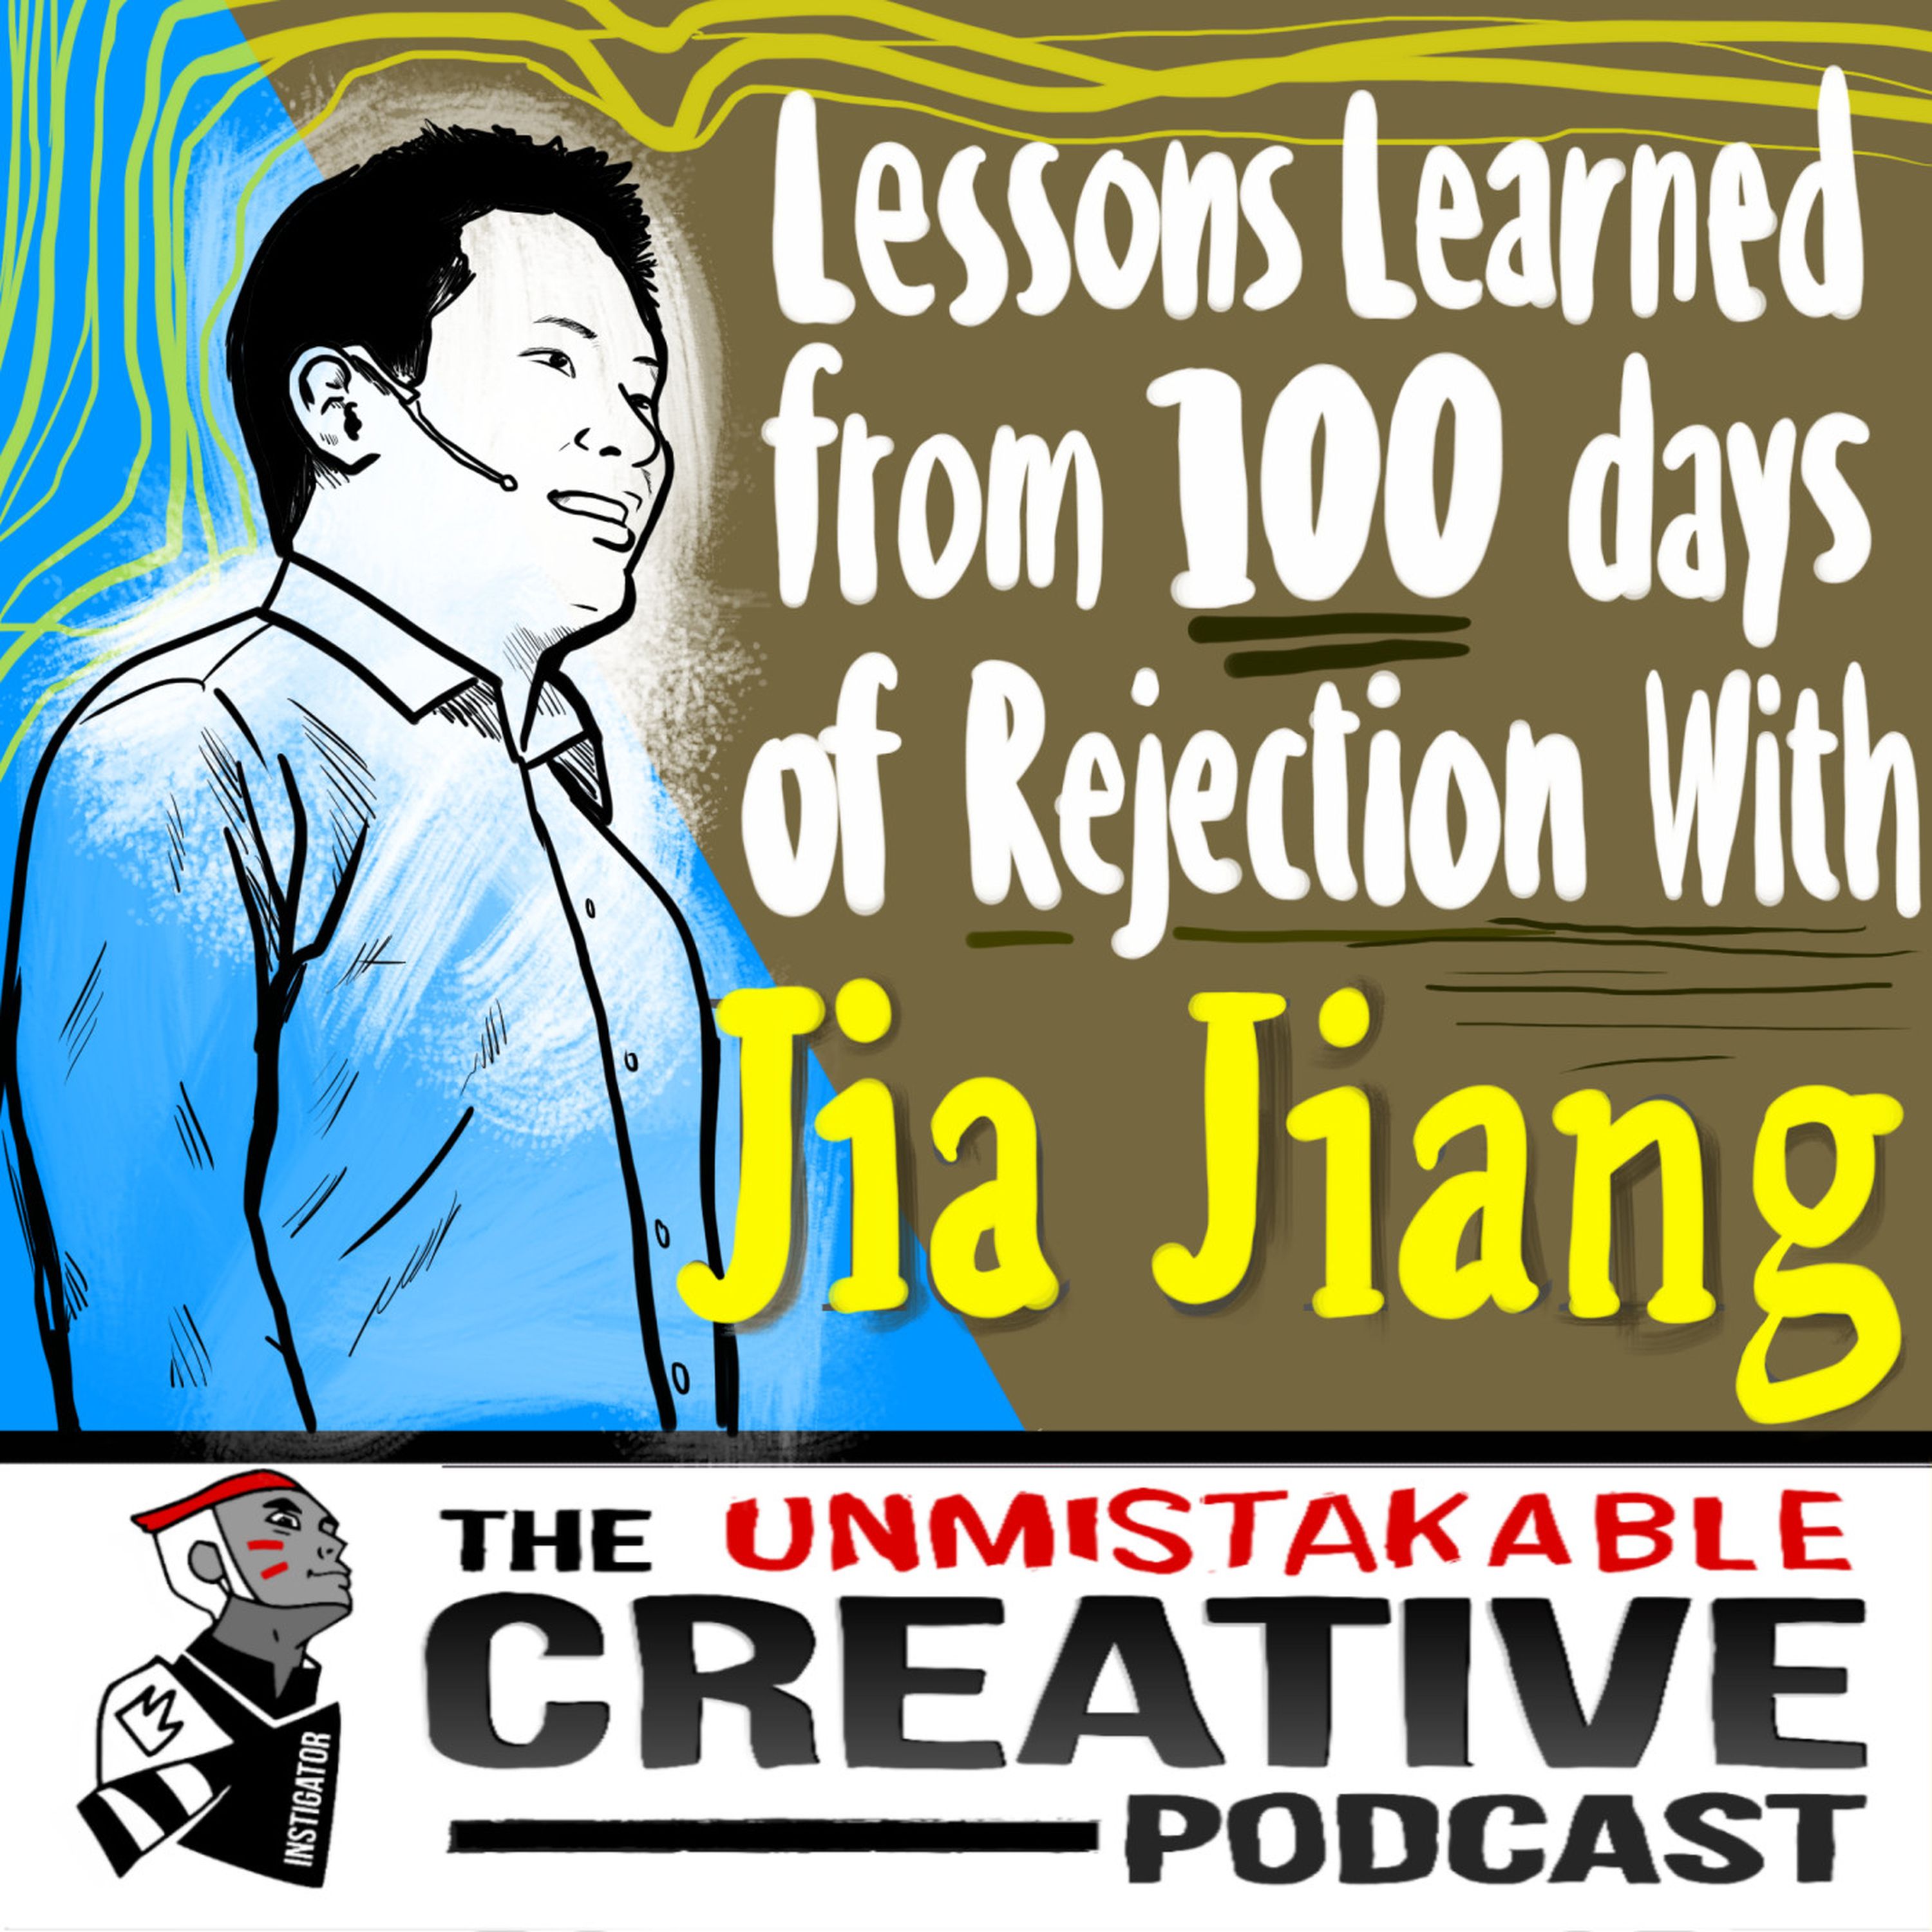 Lessons Learned from 100 Days of Rejection with Jia Jiang